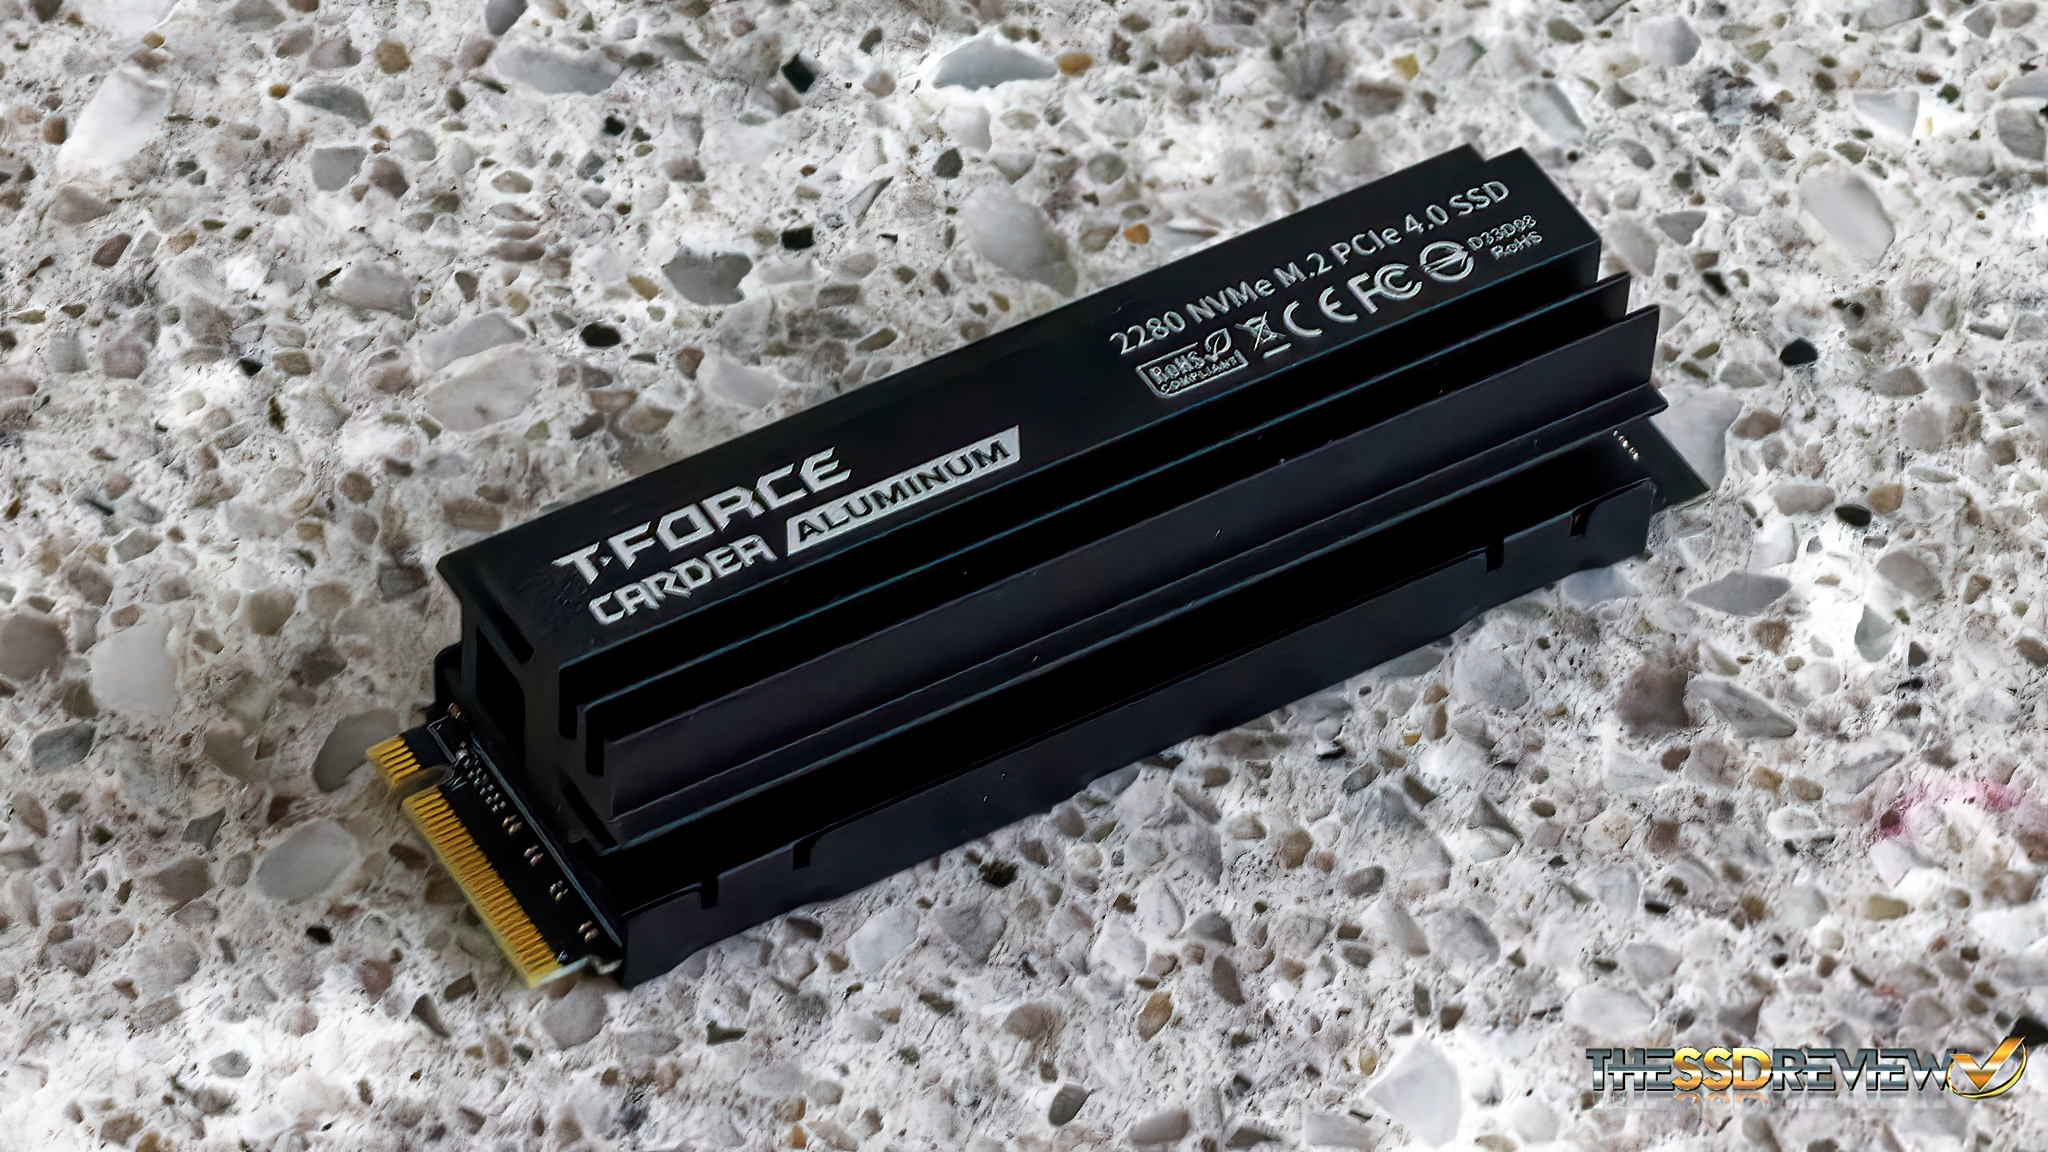 TEAMGROUP T-Force CARDEA A440 Pro Graphene Heatsink 4TB with DRAM SLC Cache 3D TLC NAND NVMe1.4 PCIe Gen4 x4 M.2 2280 Gaming Internal SSD Read/Write 7,400/7,000 MB/s TM8FPR004T0C129 